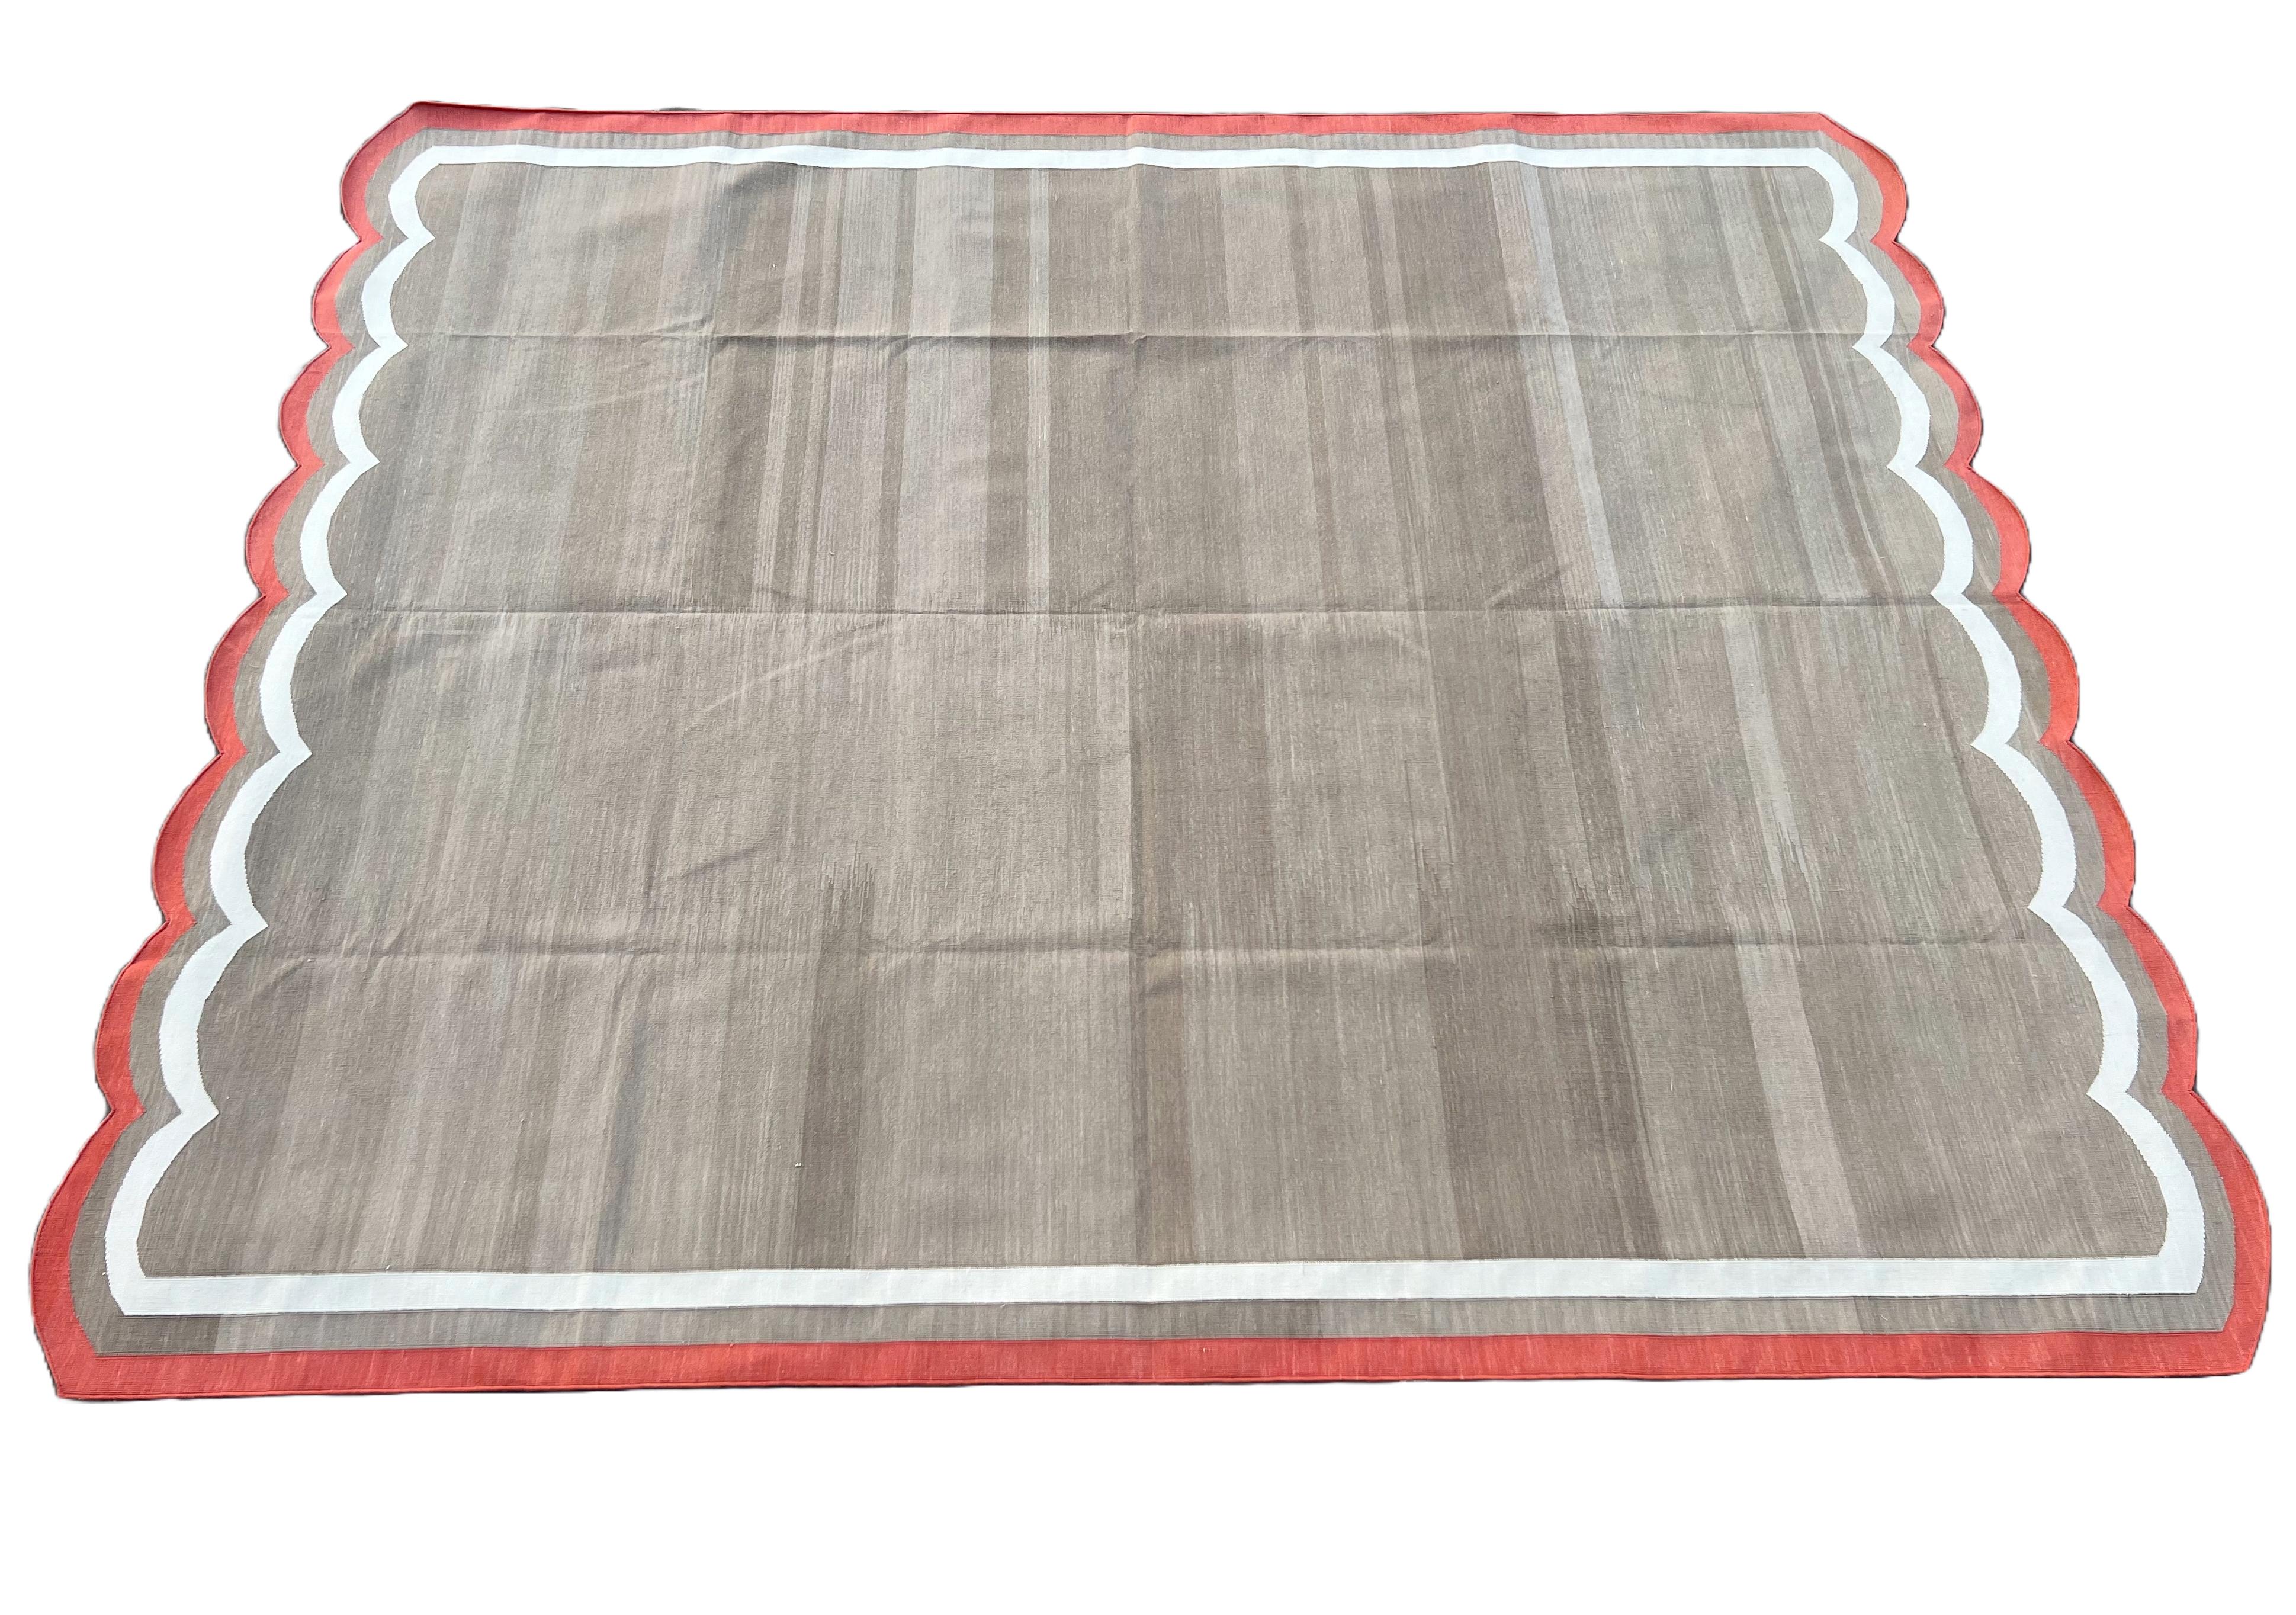 Handmade Cotton Area Flat Weave Rug, 8x10 Beige And Red Scalloped Indian Dhurrie For Sale 4